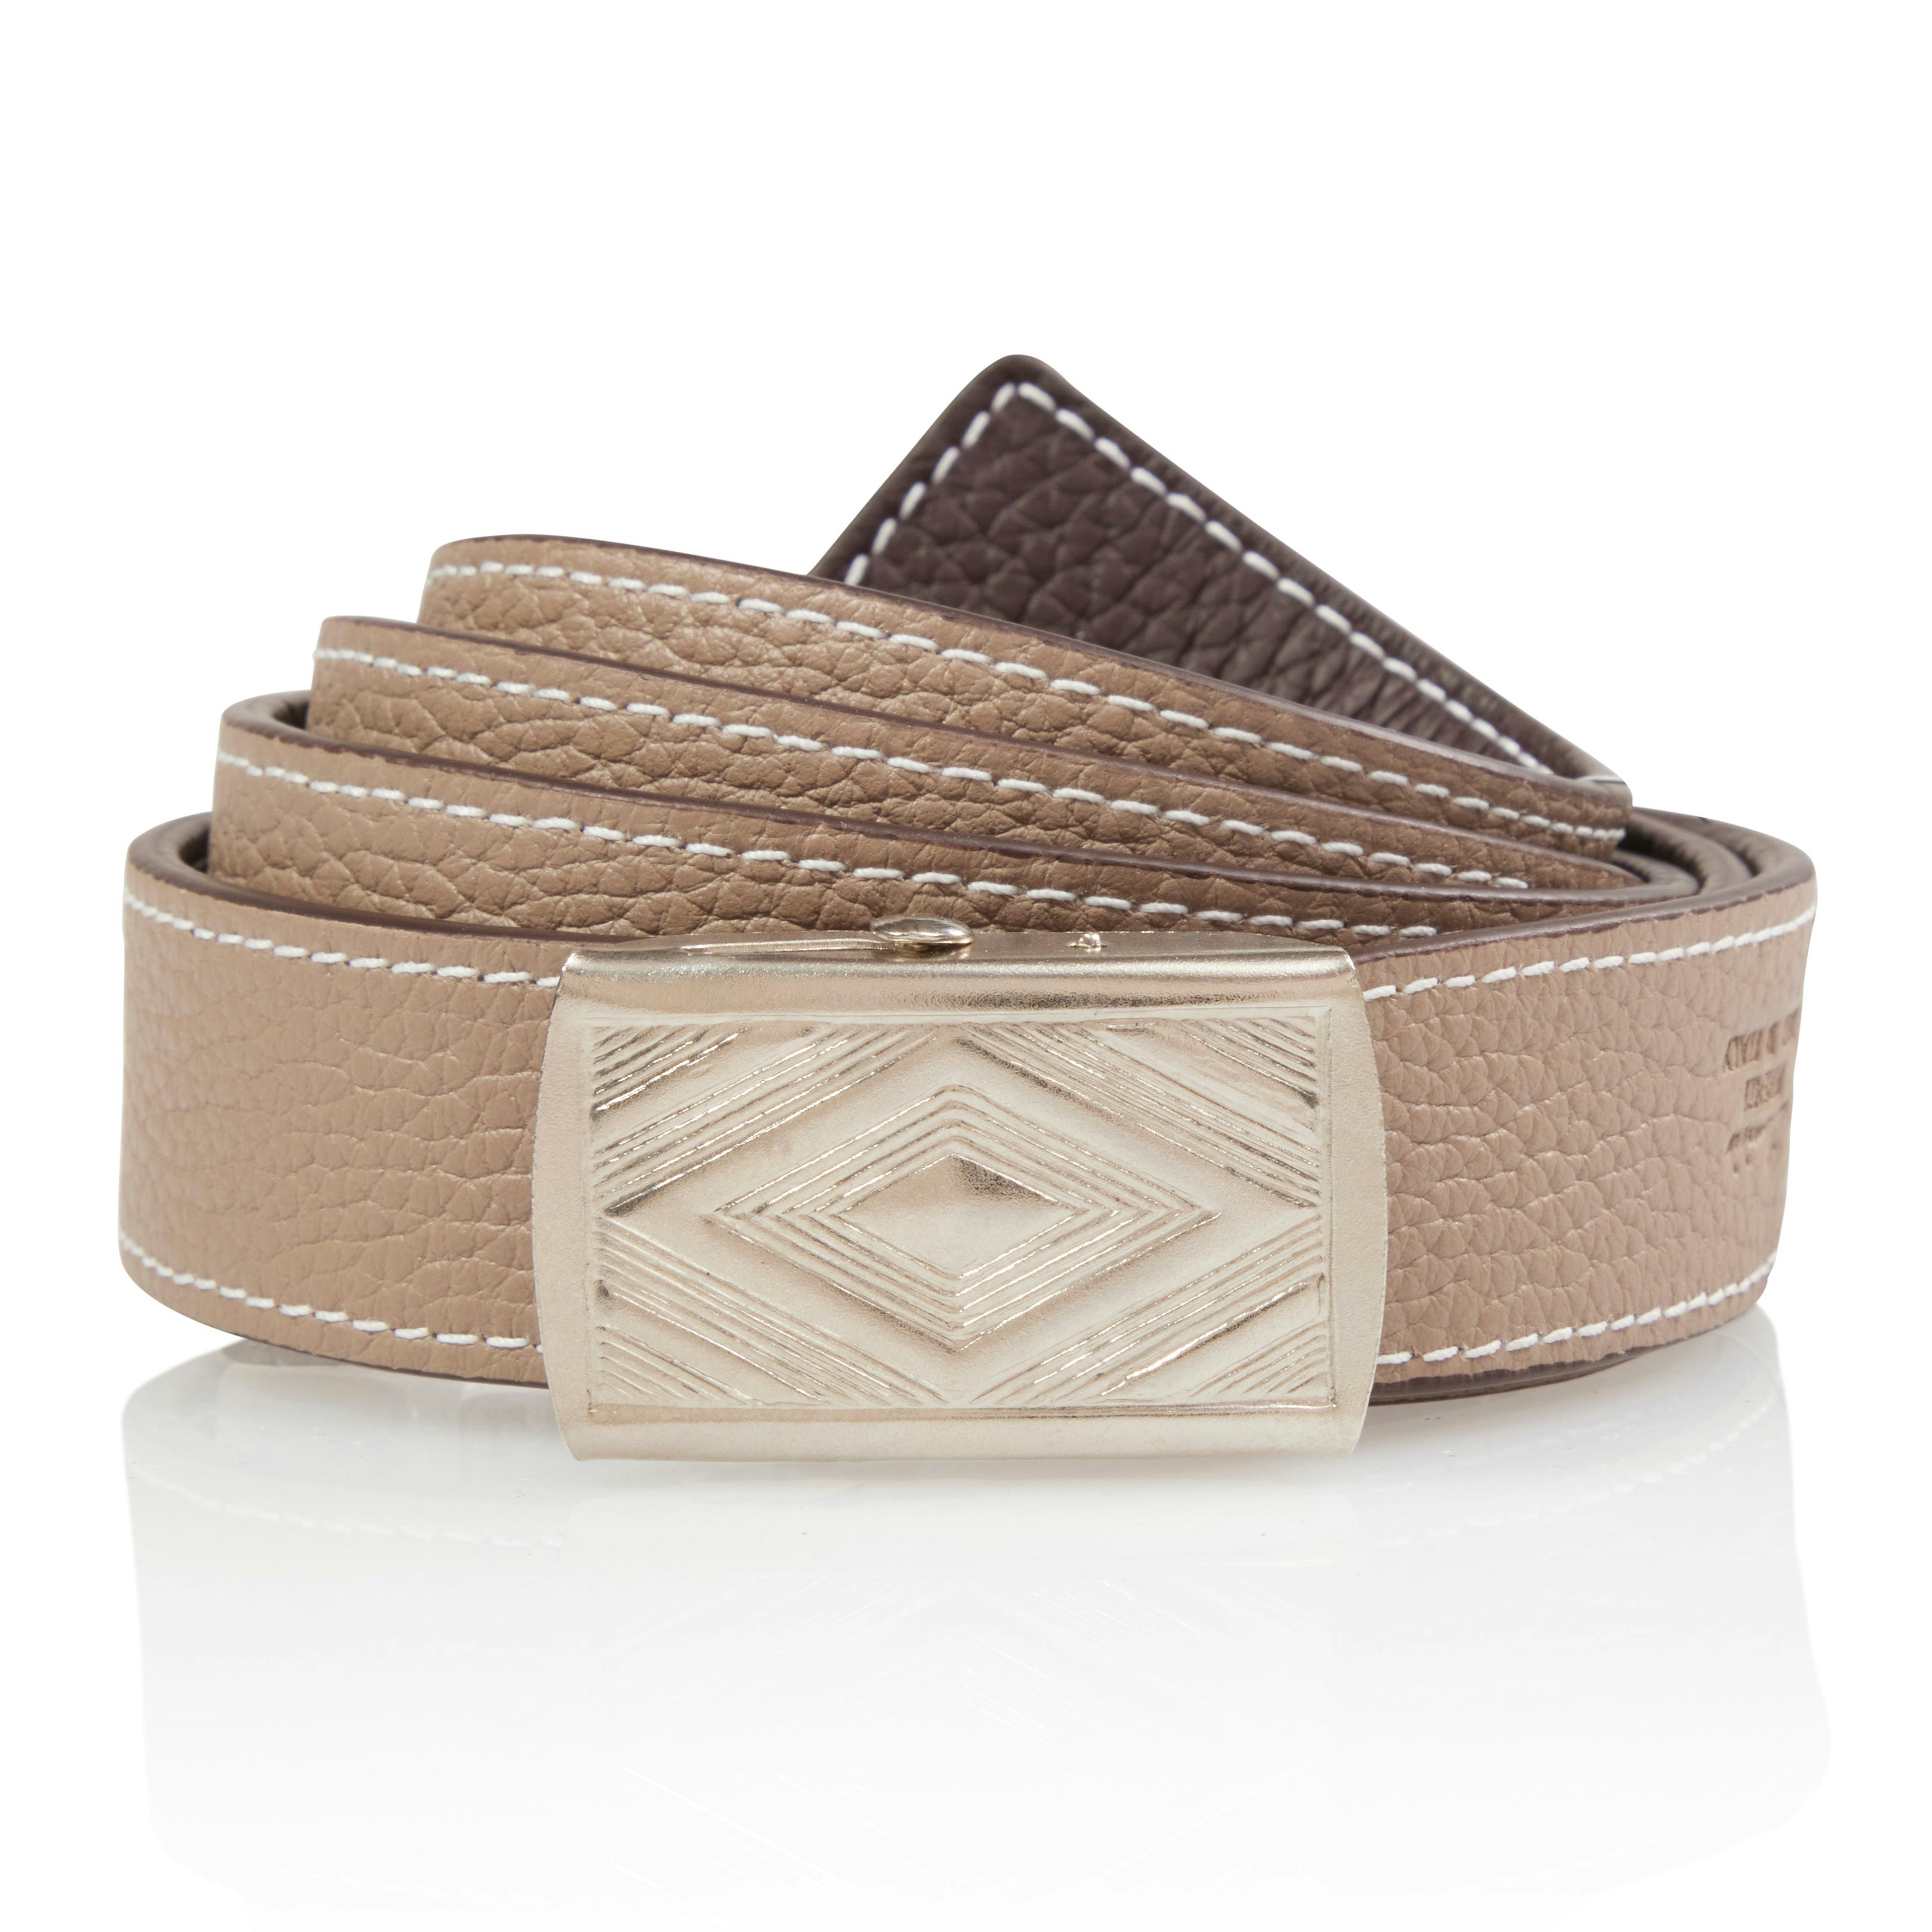 Woven Belt with Leather Covered Buckle - The Armoury